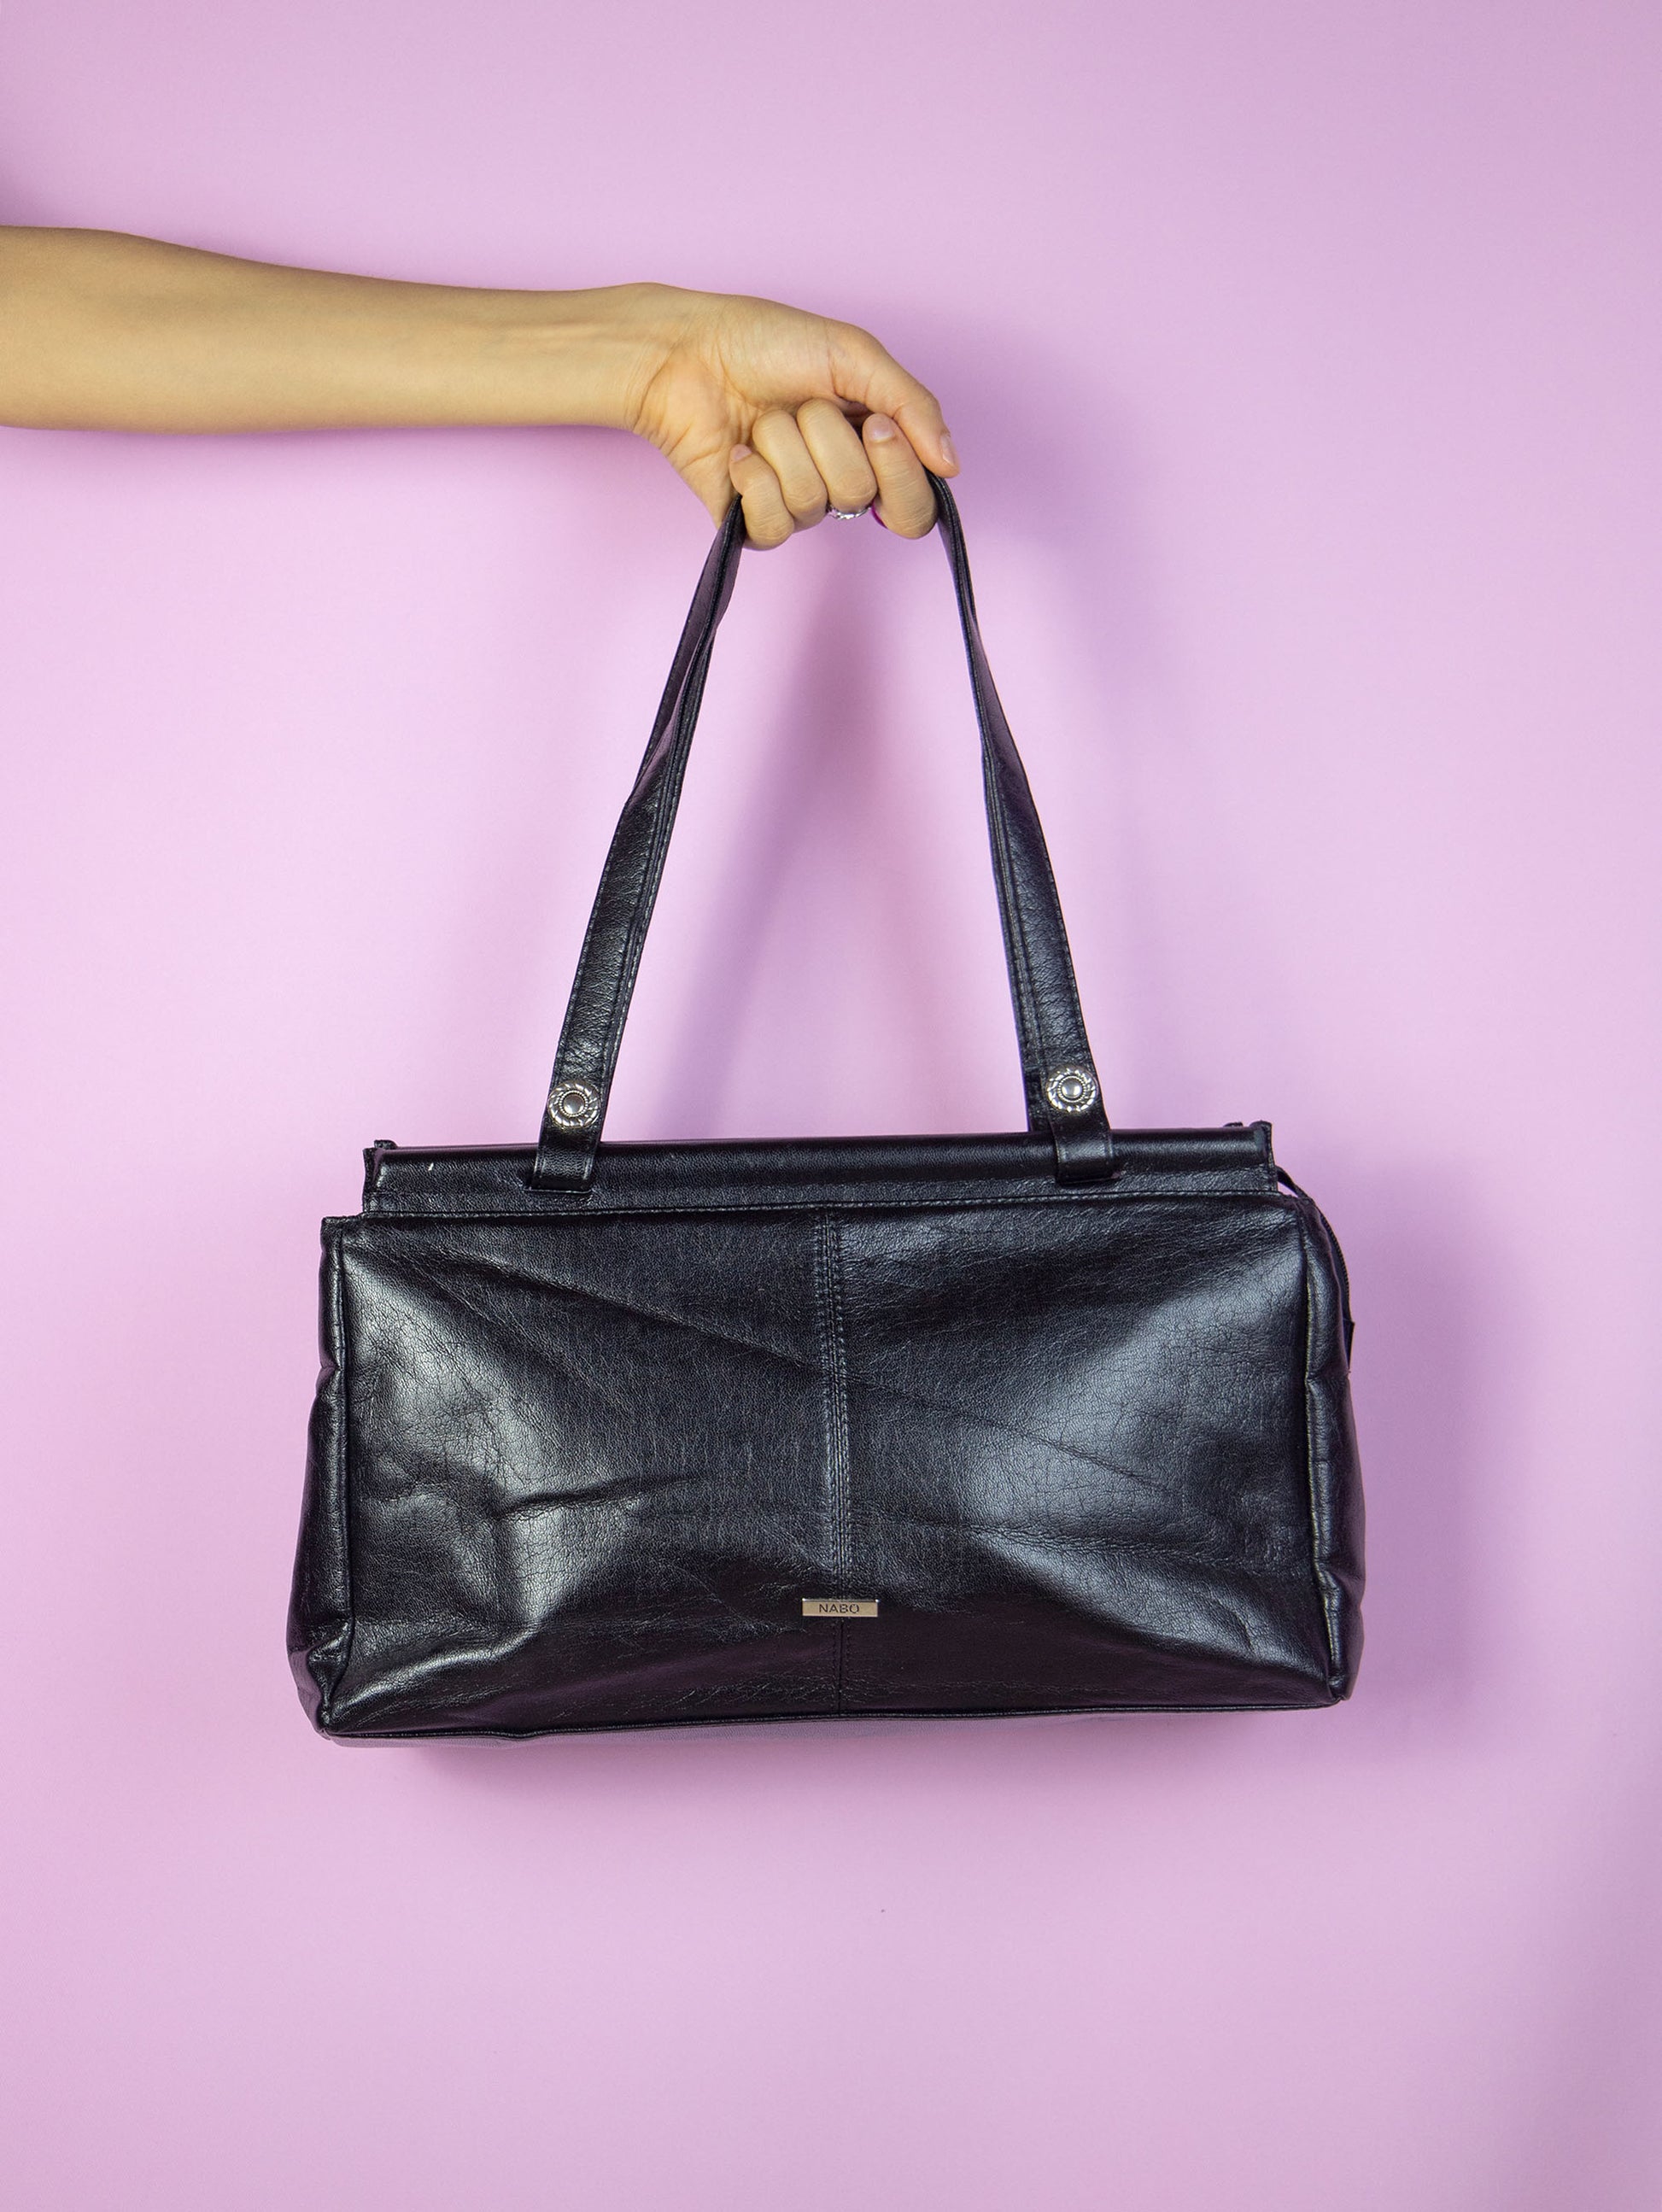 The Vintage 90s Black Shoulder Bag is a rectangular faux leather bag with several compartments, zipper closure and double handle. Casual retro minimalist 1990s handbag.